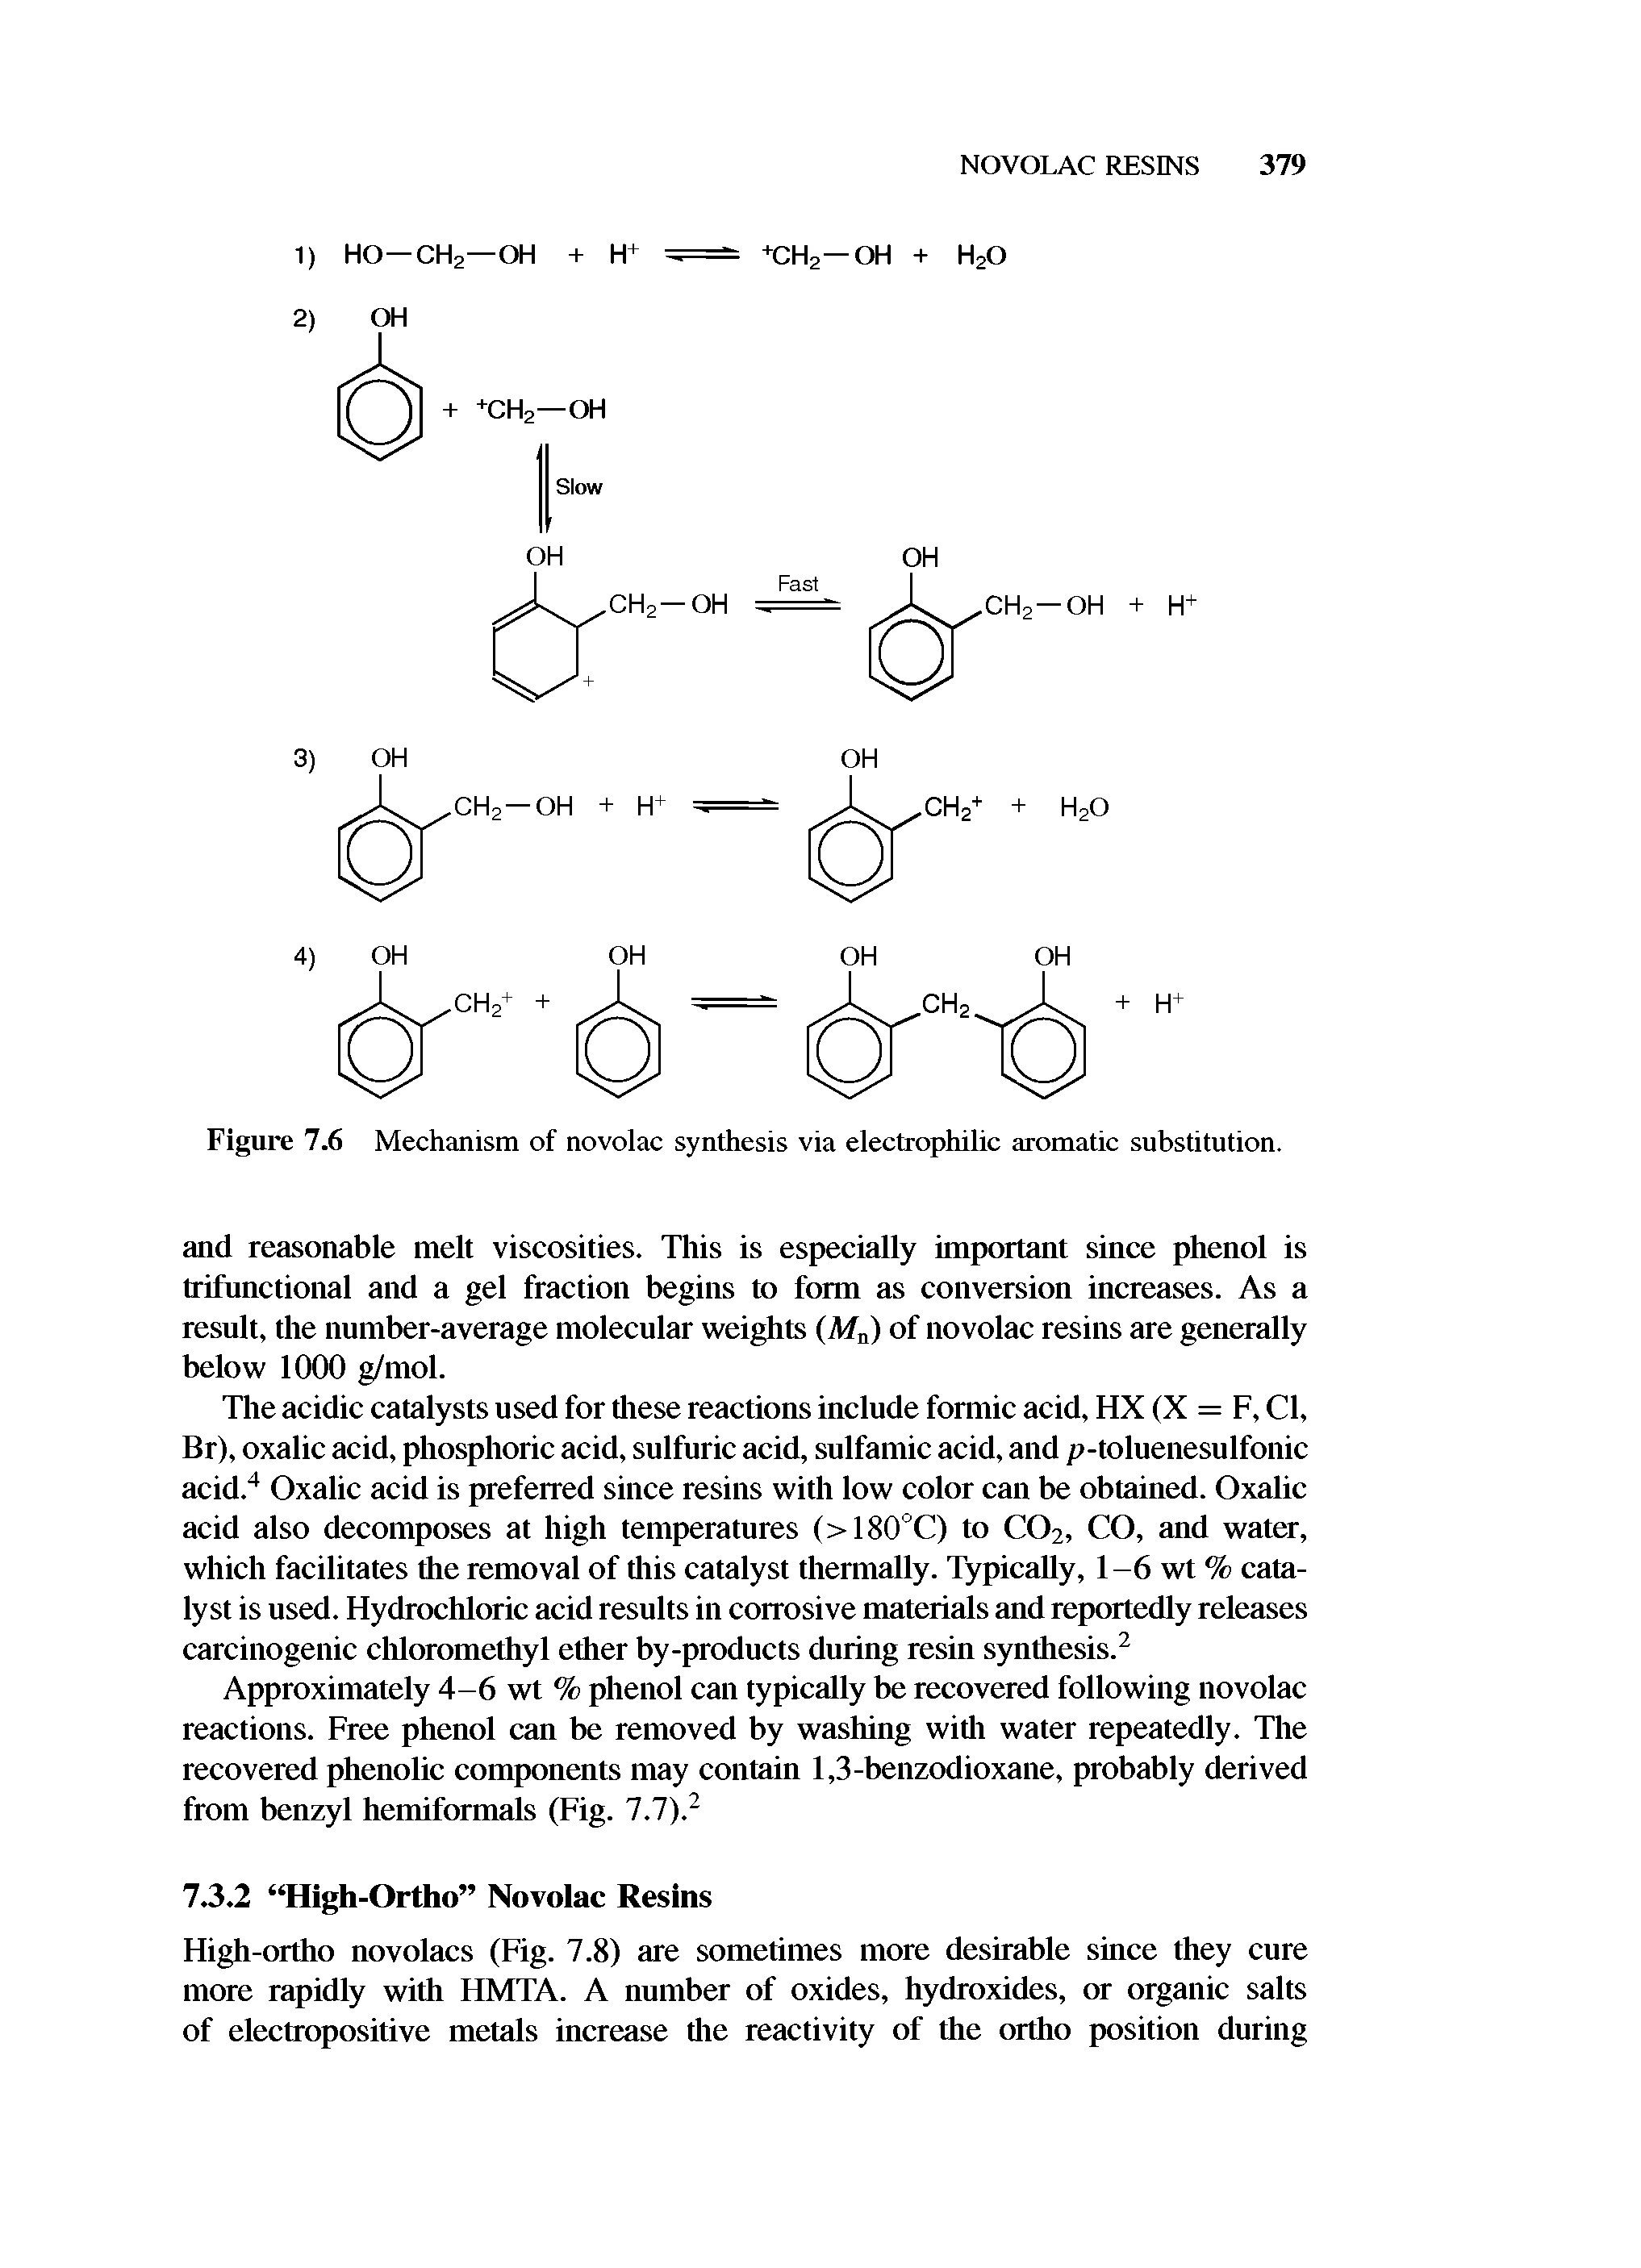 Figure 7.6 Mechanism of novolac synthesis via electrophilic aromatic substitution.